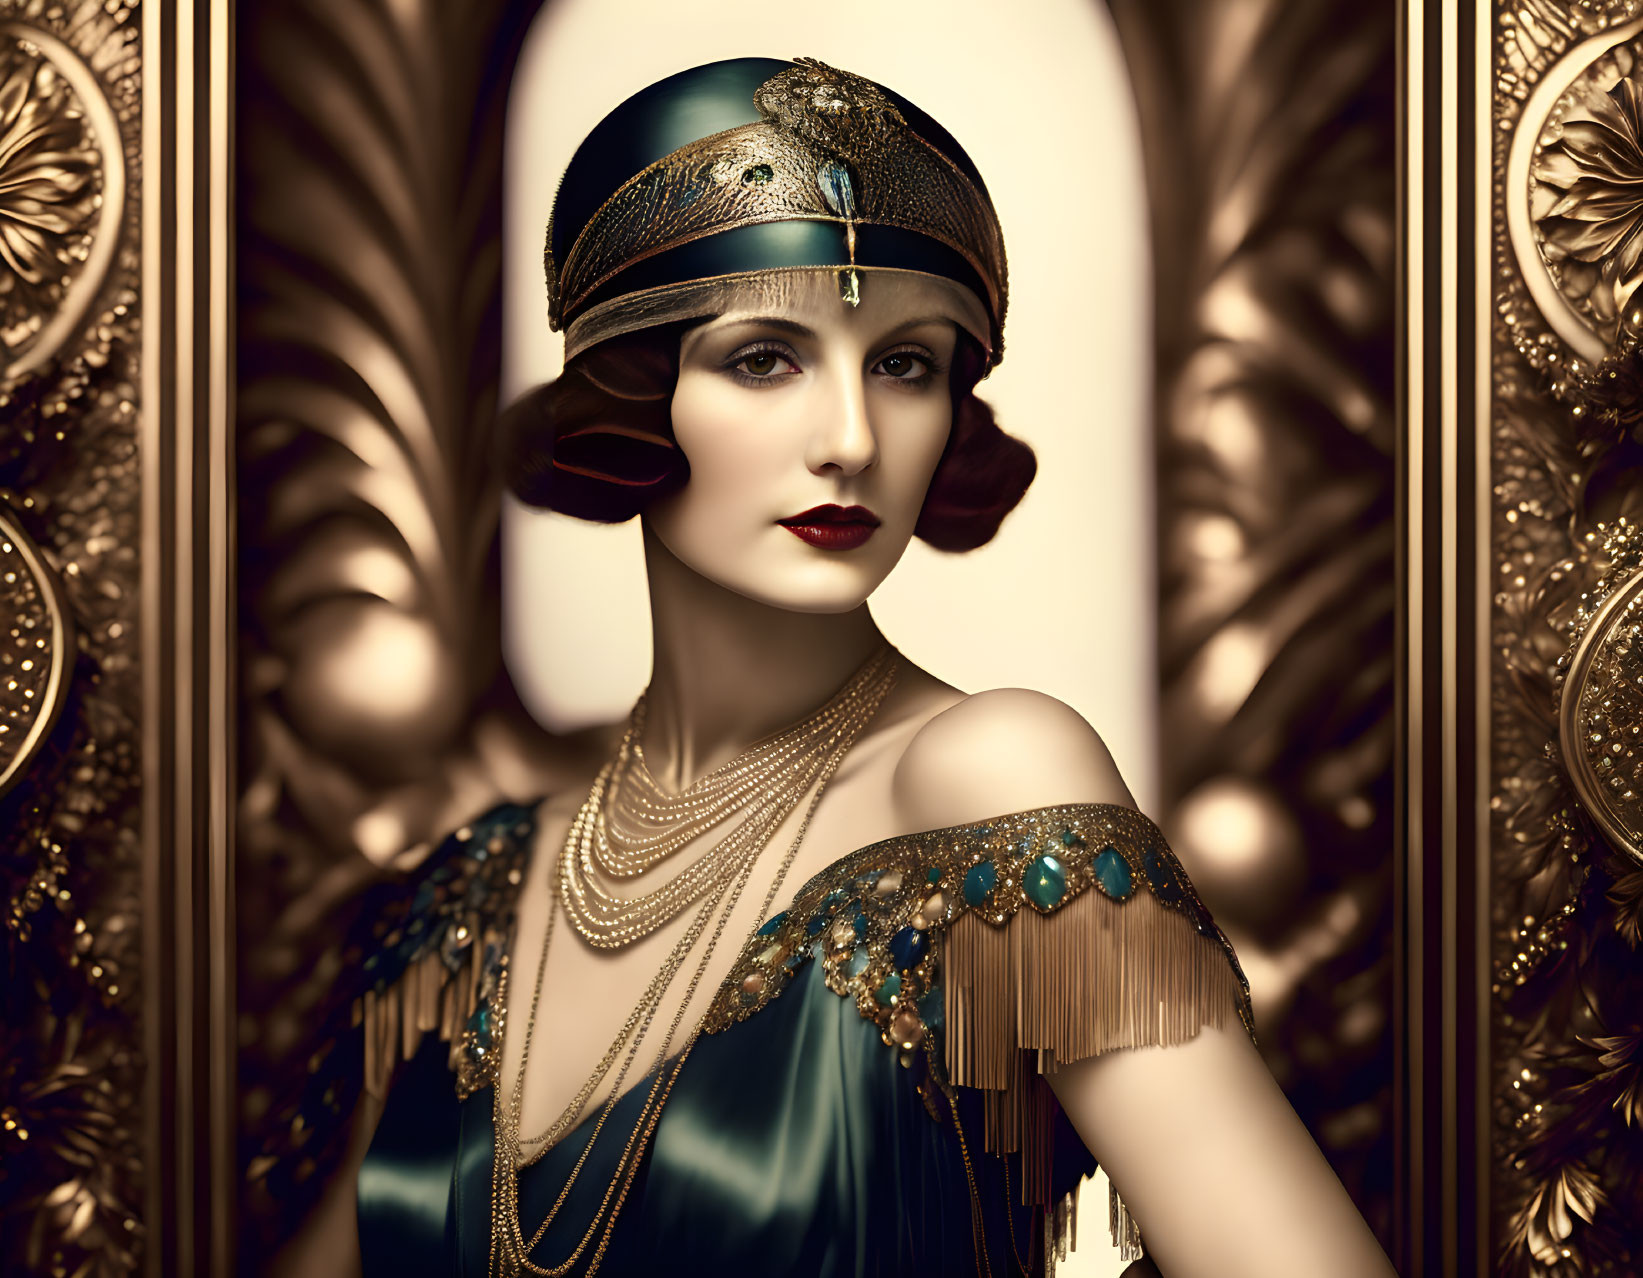 1920s flapper woman in elegant attire with bob haircut and beaded headband